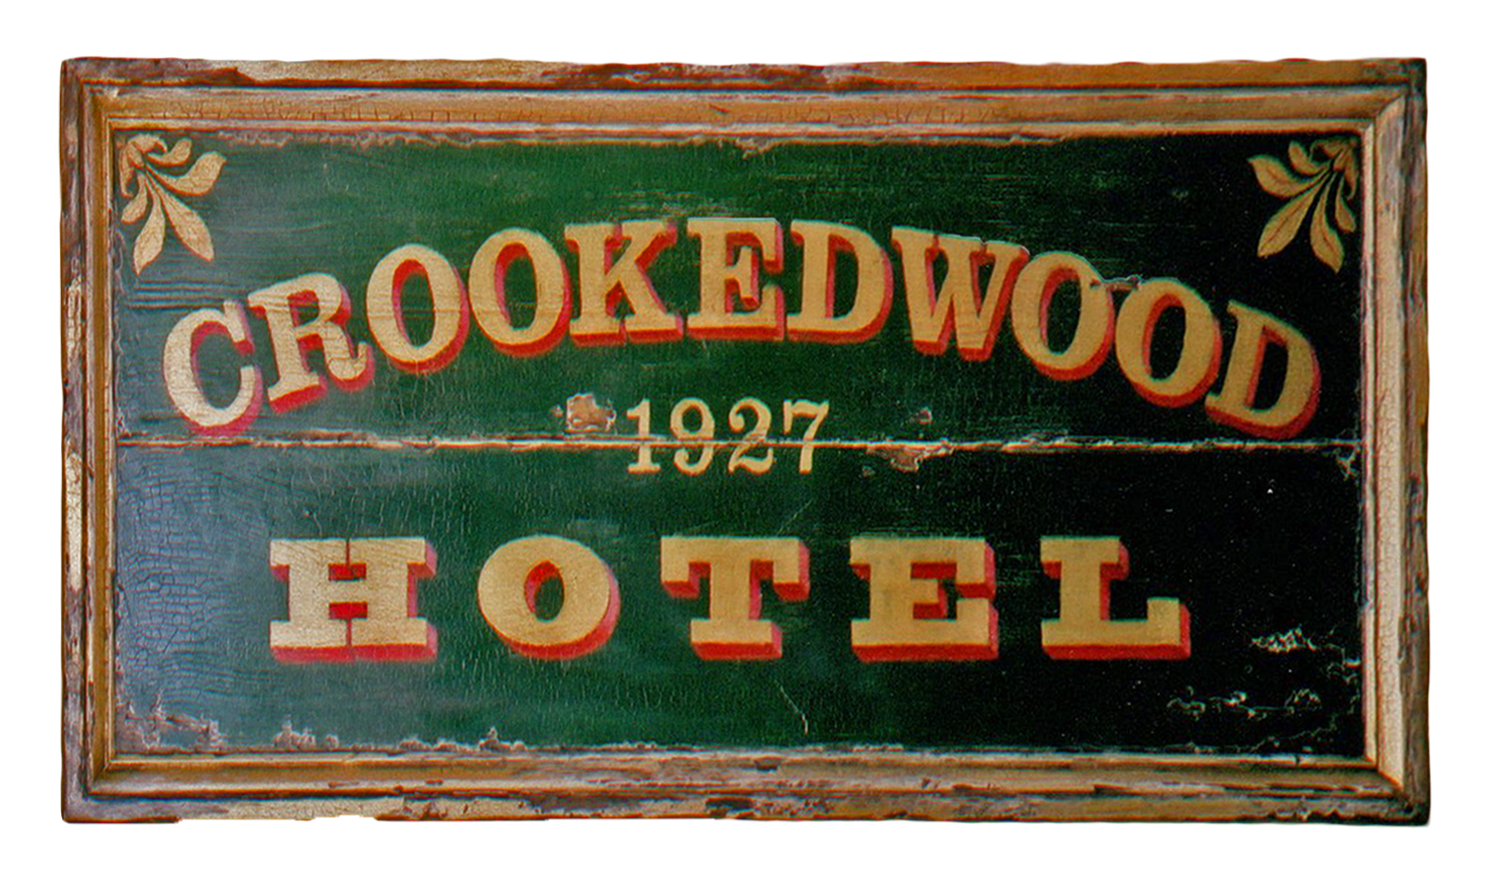 "Crookedwodd Hotel" - Mixed media on pine by Peter Koenig. Late 18th early 19th century hotel and tavern sign